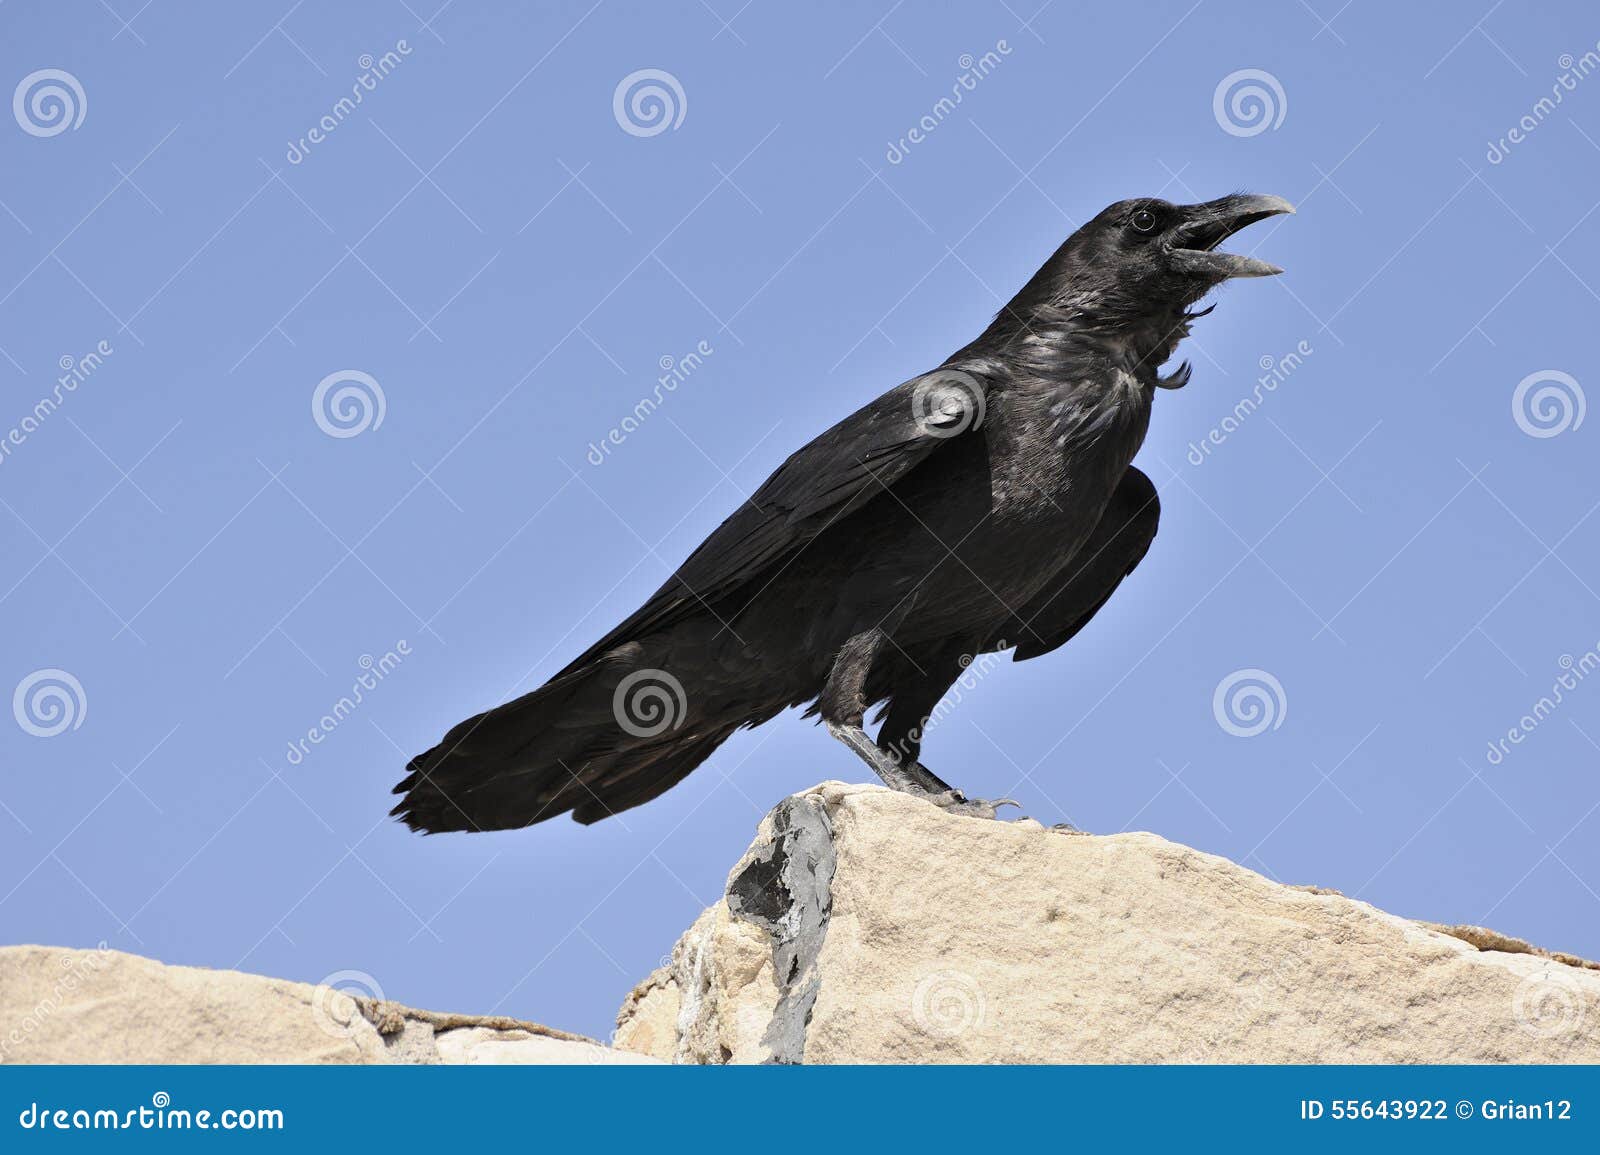 adult chihuahuan raven